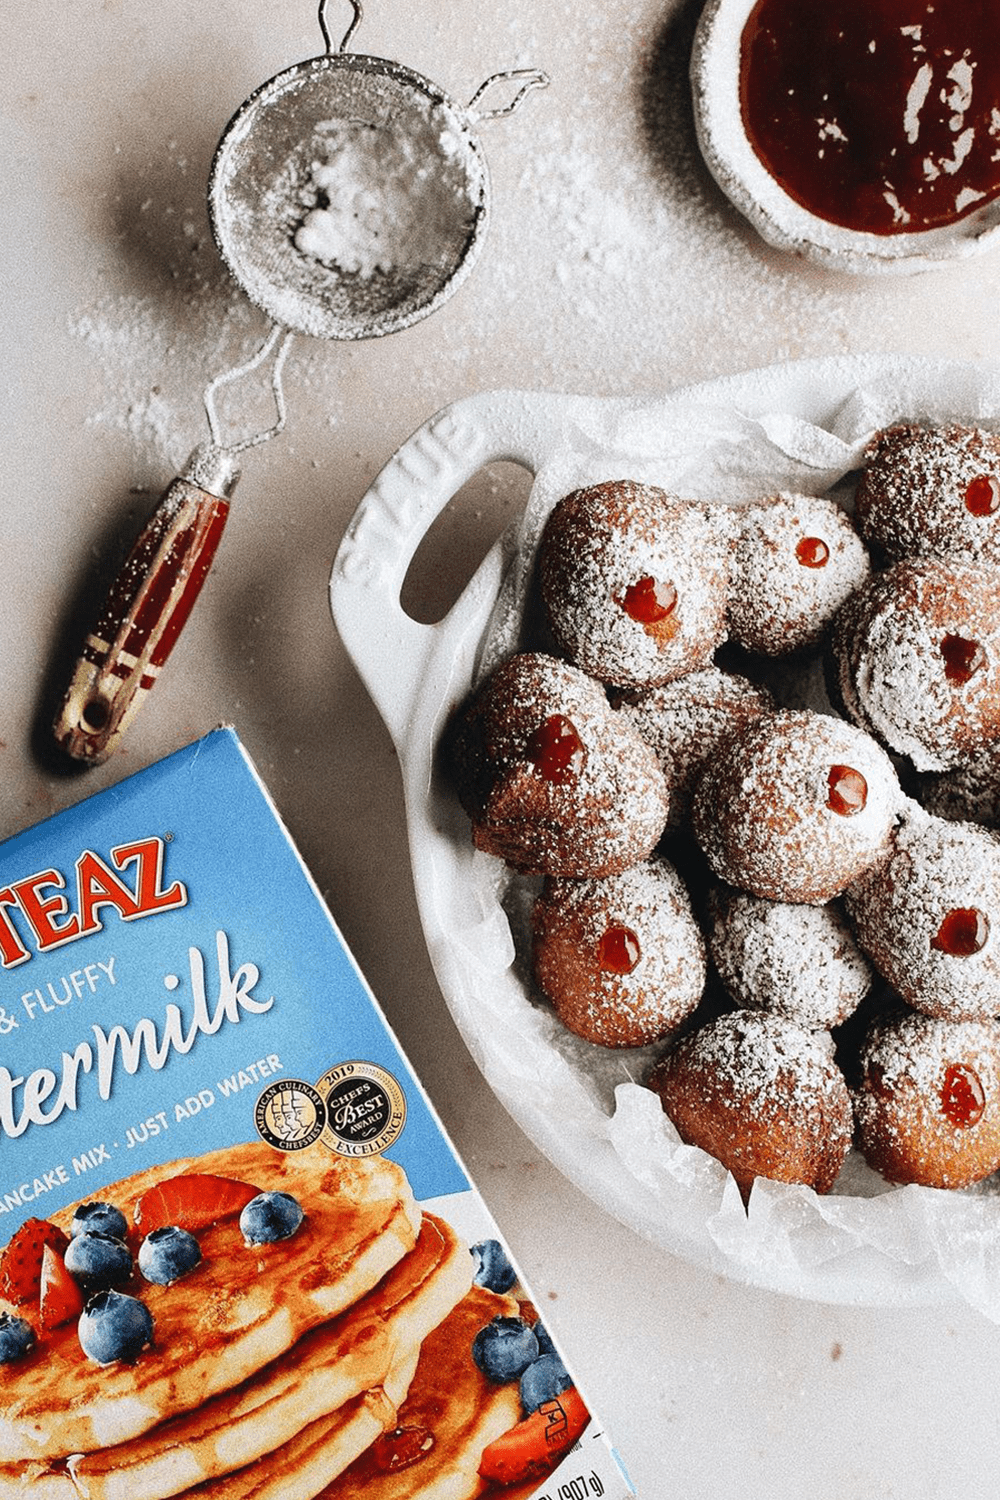 A platter of Drop Donuts topped with powdered sugar.